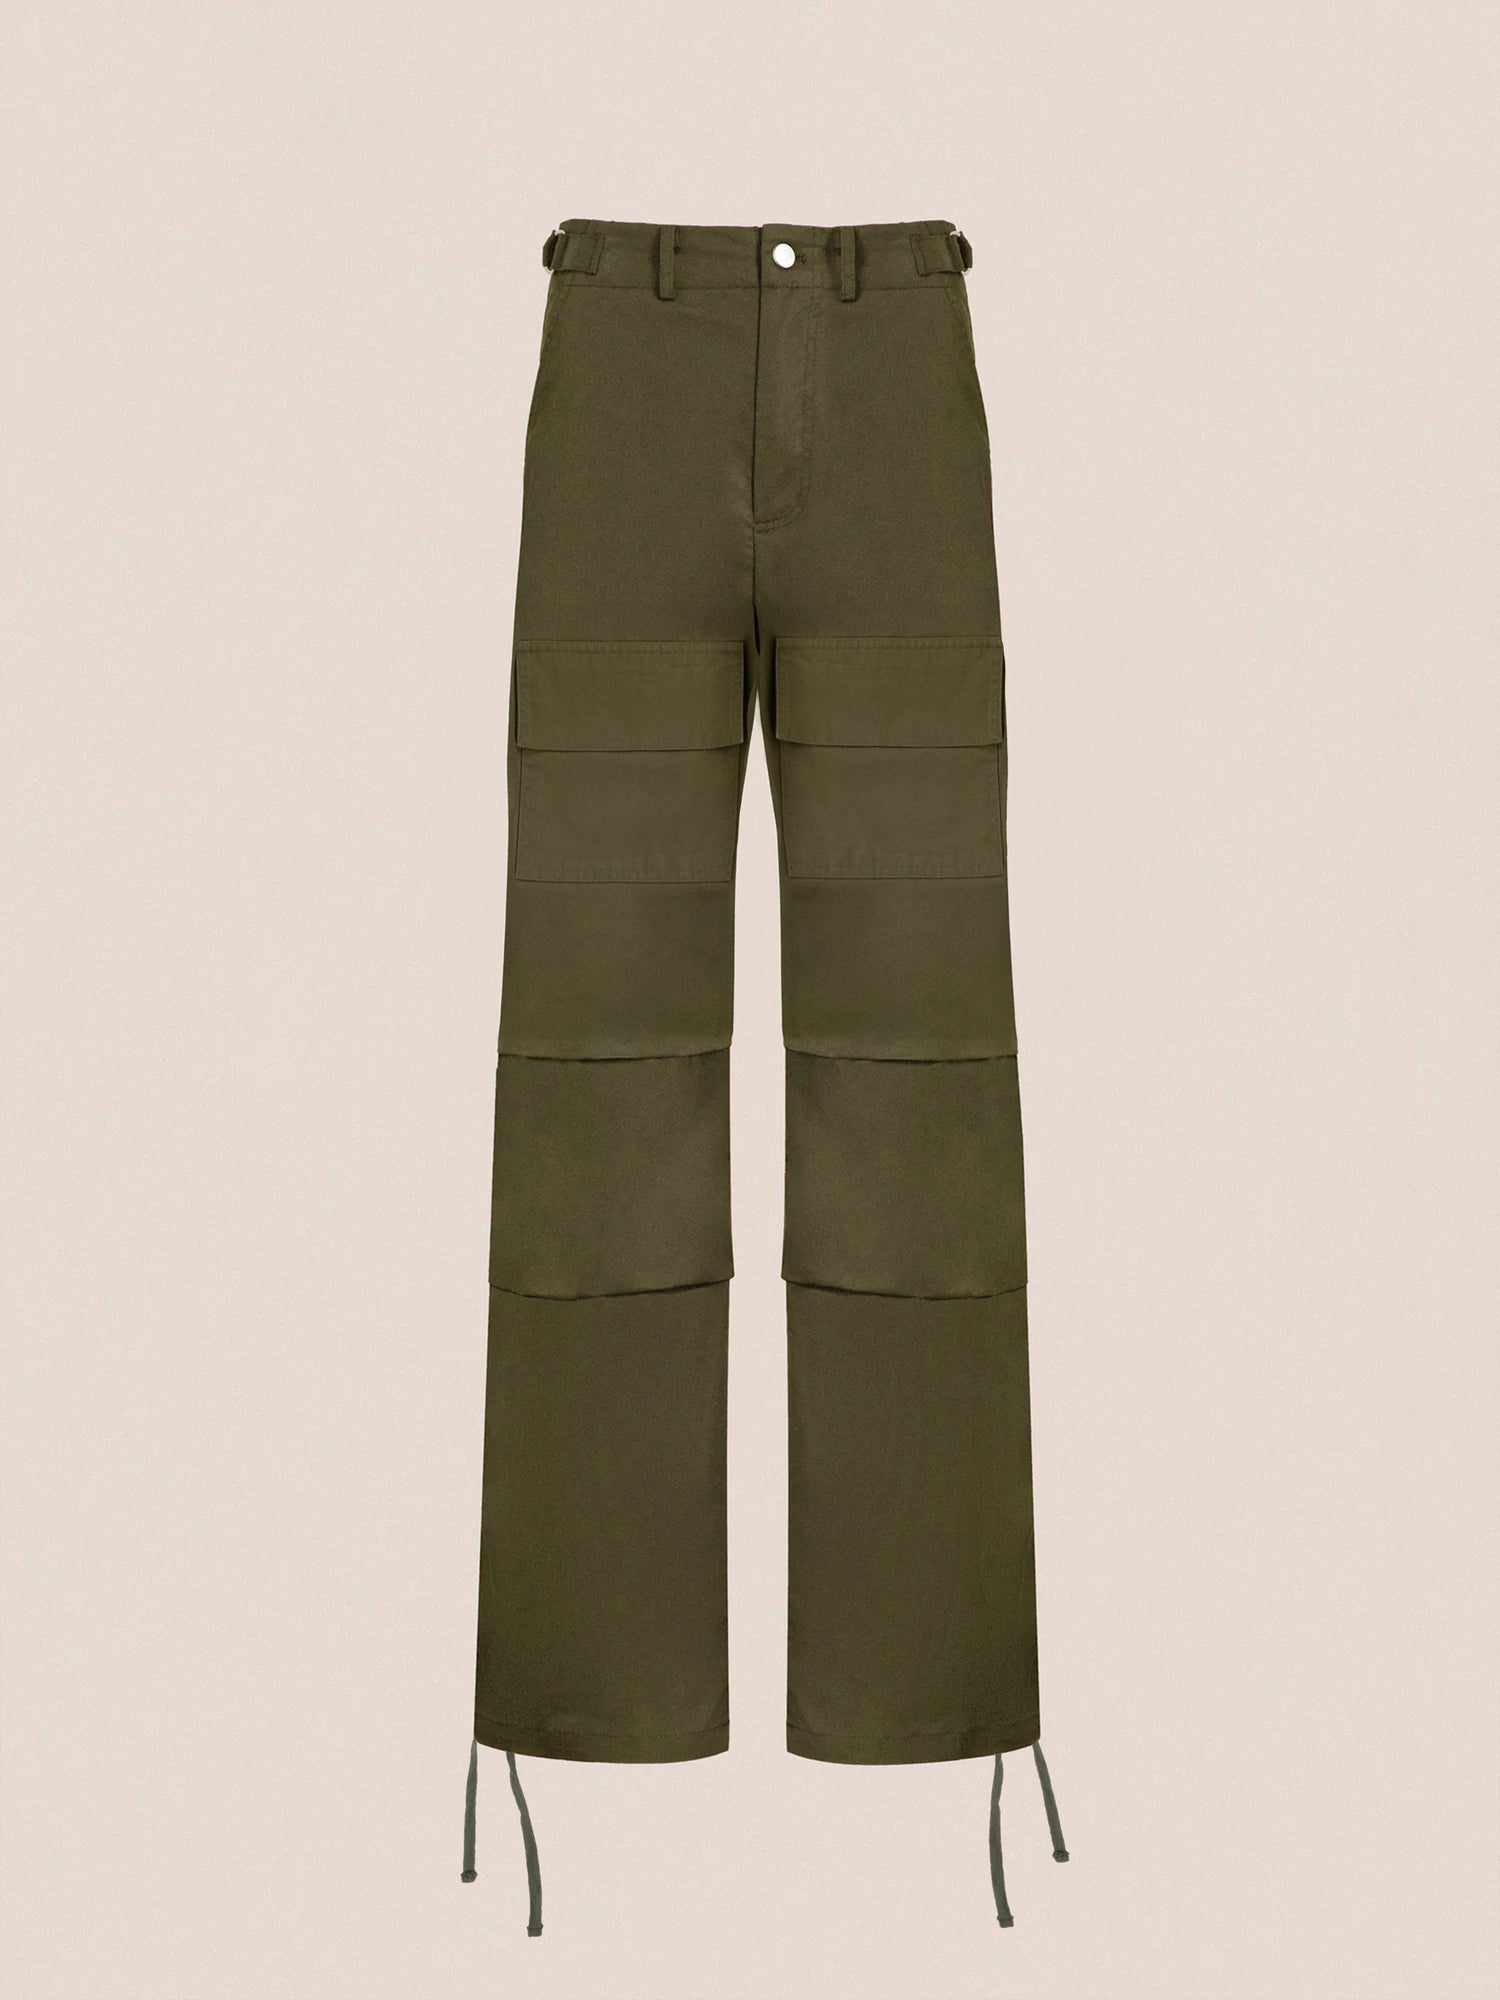 Olive green Found Parachute Cargo Twill Pants with multiple pockets and drawstring details, displayed against a plain background.